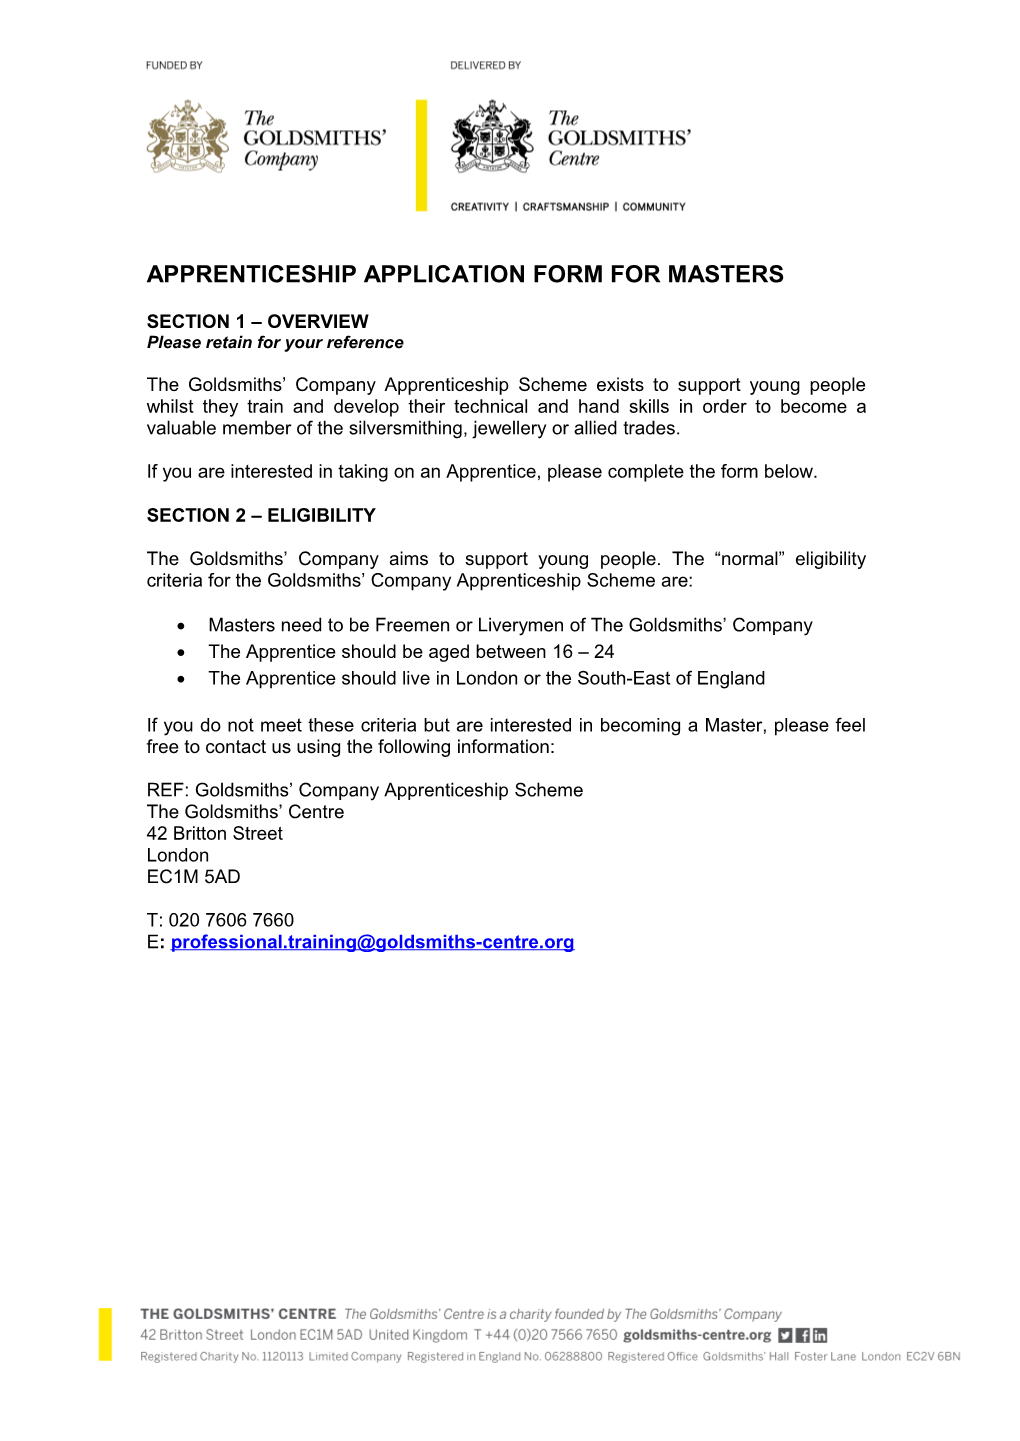 Apprenticeship Application Form for Masters